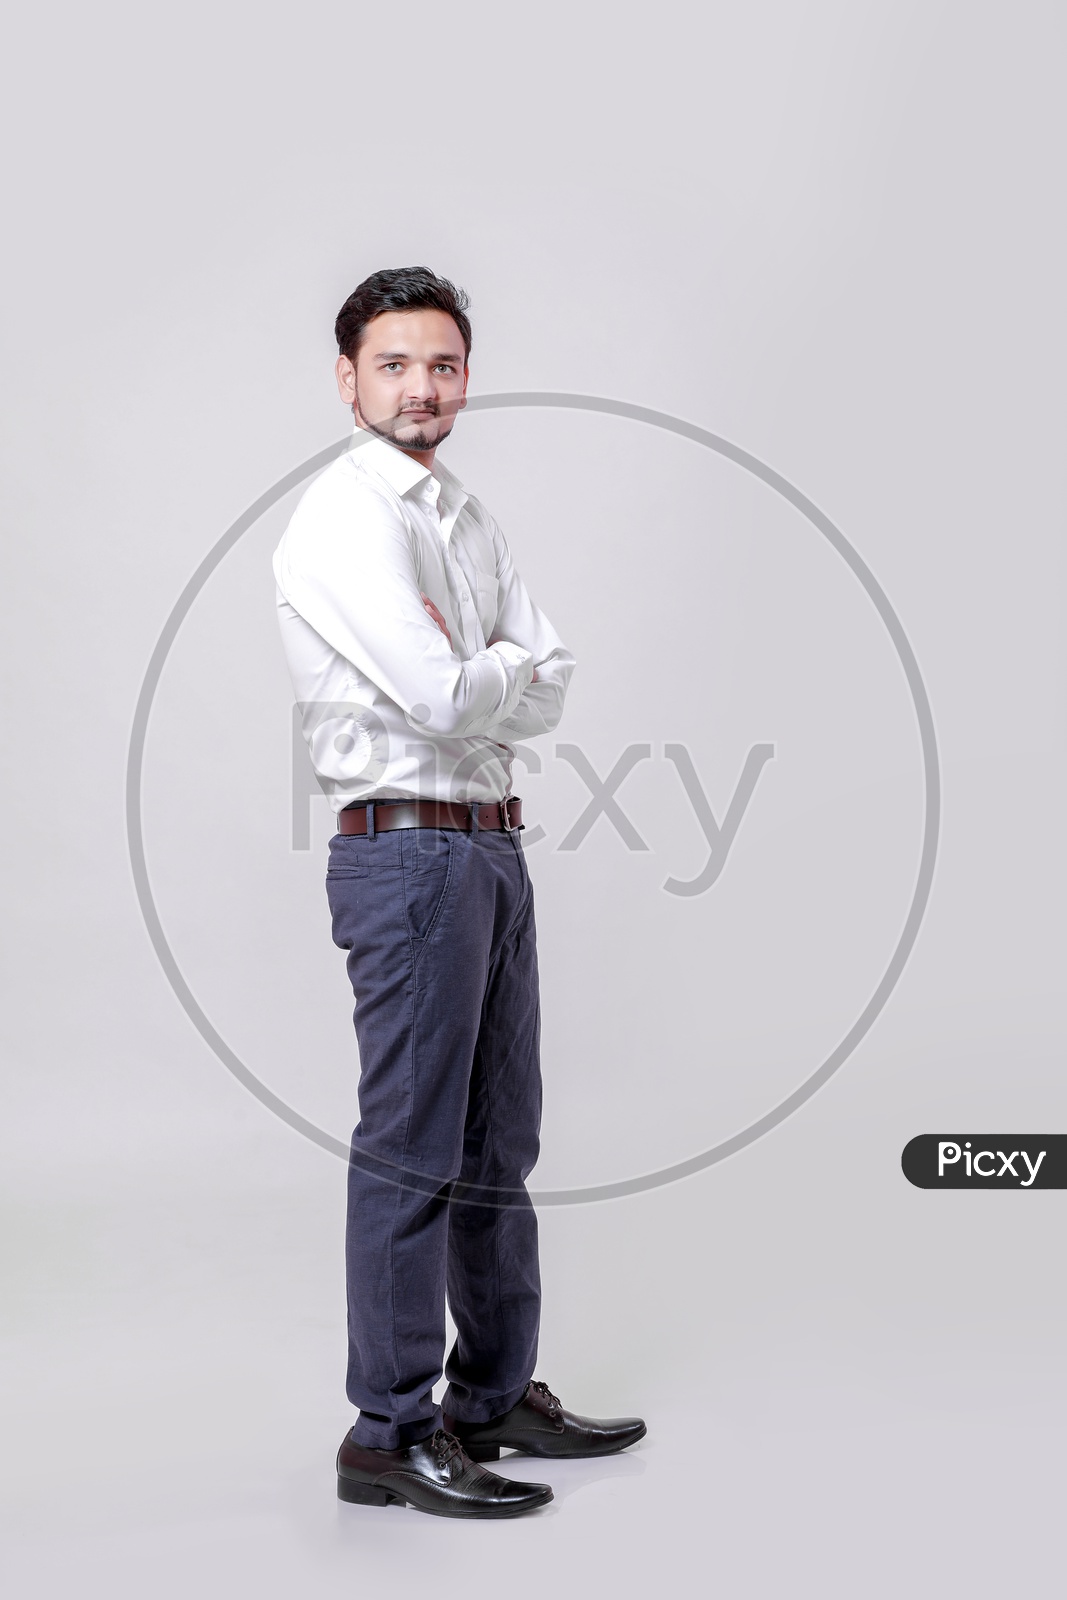 Indian Young Professional Man With a Smiling Face On an Isolated White Background